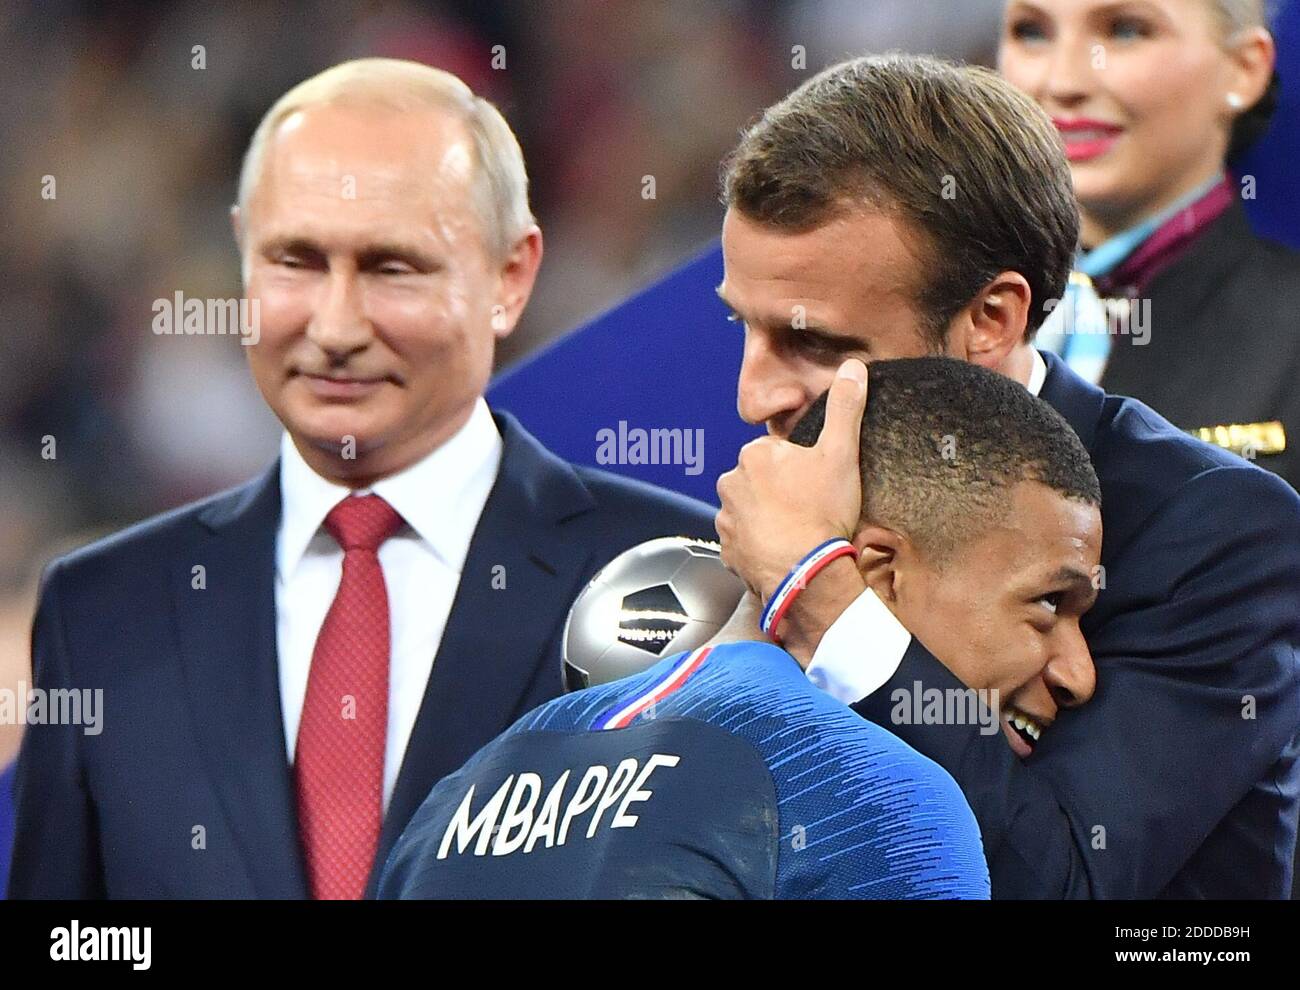 President Emmanuel Macron presents France's forward Kylian Mbappe with the 2018 FIFA Best Young Player award at a victory ceremony after the 2018 FIFA World Cup final football match between France and Croatia at Luzhniki Stadium. on july 15, 2018. Photo by Christian Liewig/ABACAPRESS.COM Stock Photo